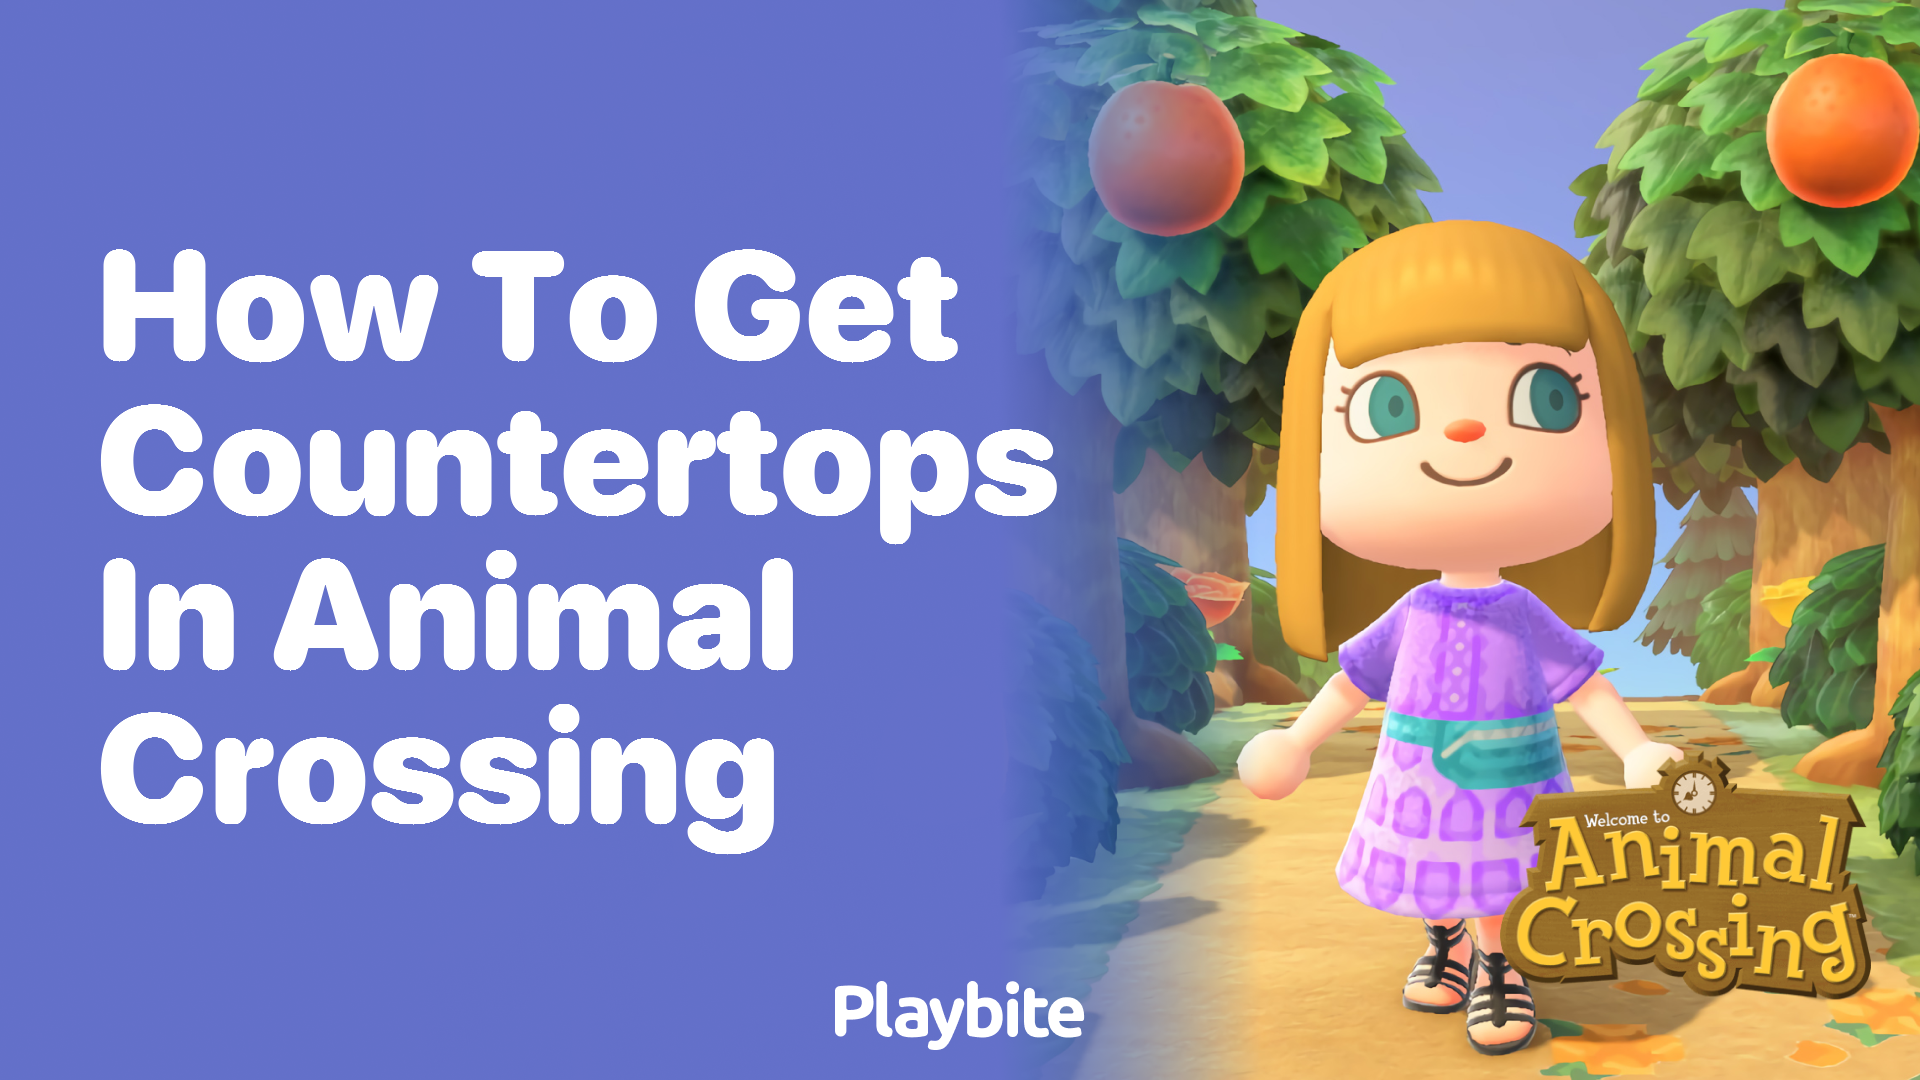 How to Get Countertops in Animal Crossing